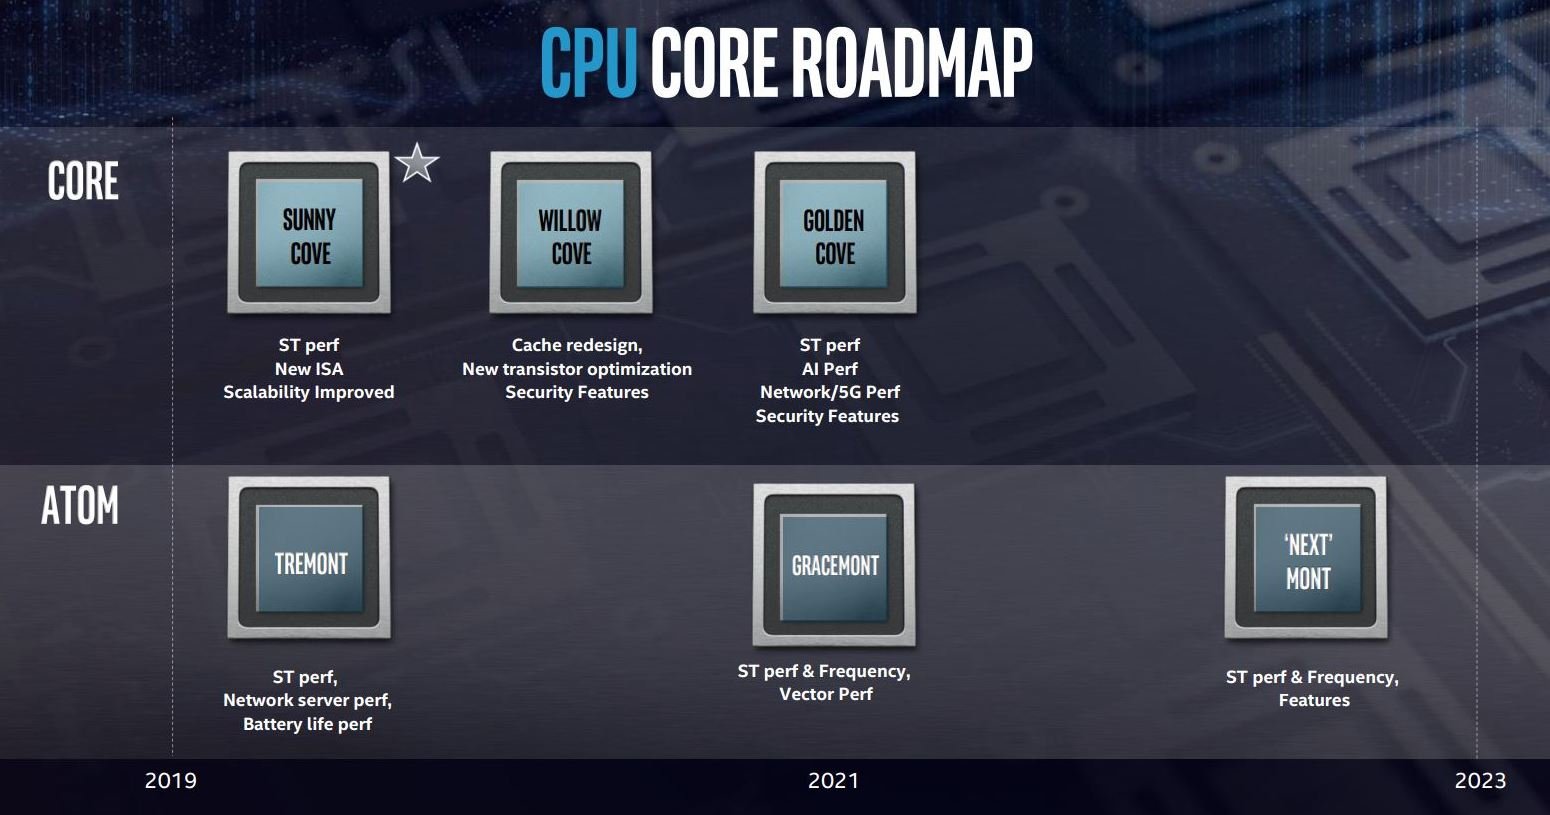 Sunny Cove is Intel’s upcoming architecture for Core processors